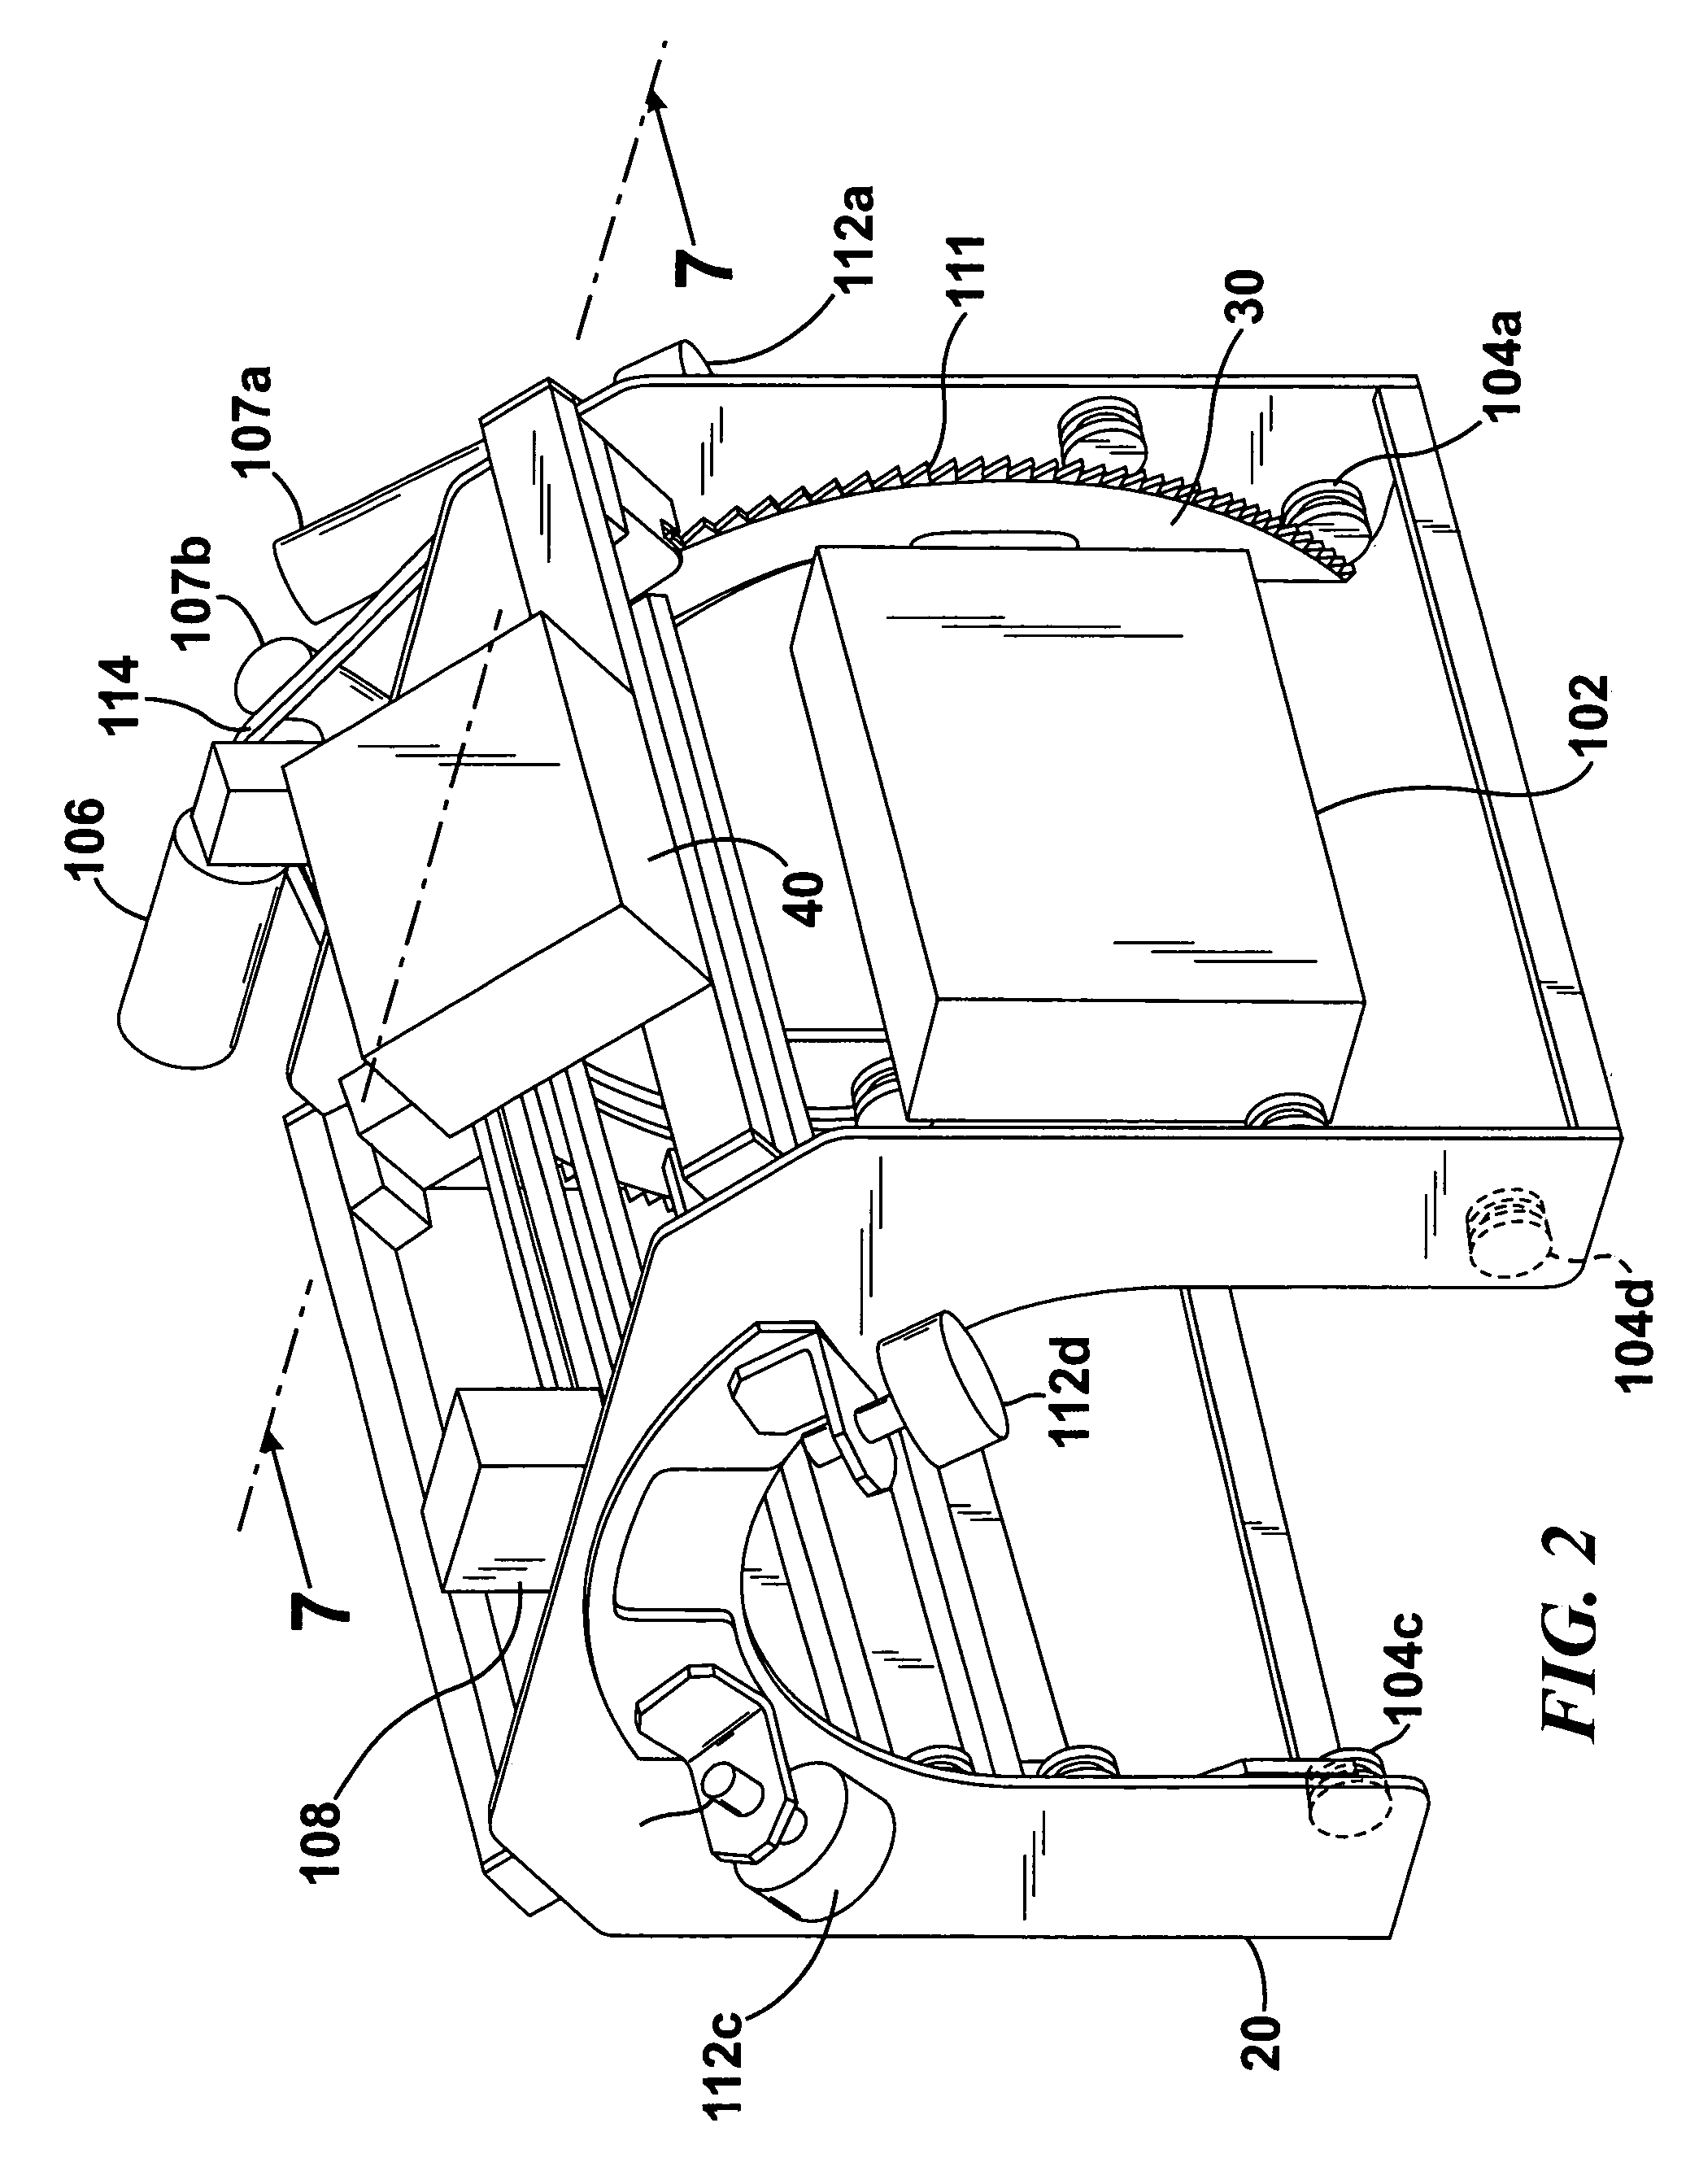 Method and apparatus for automated, digital, radiographic inspection of piping